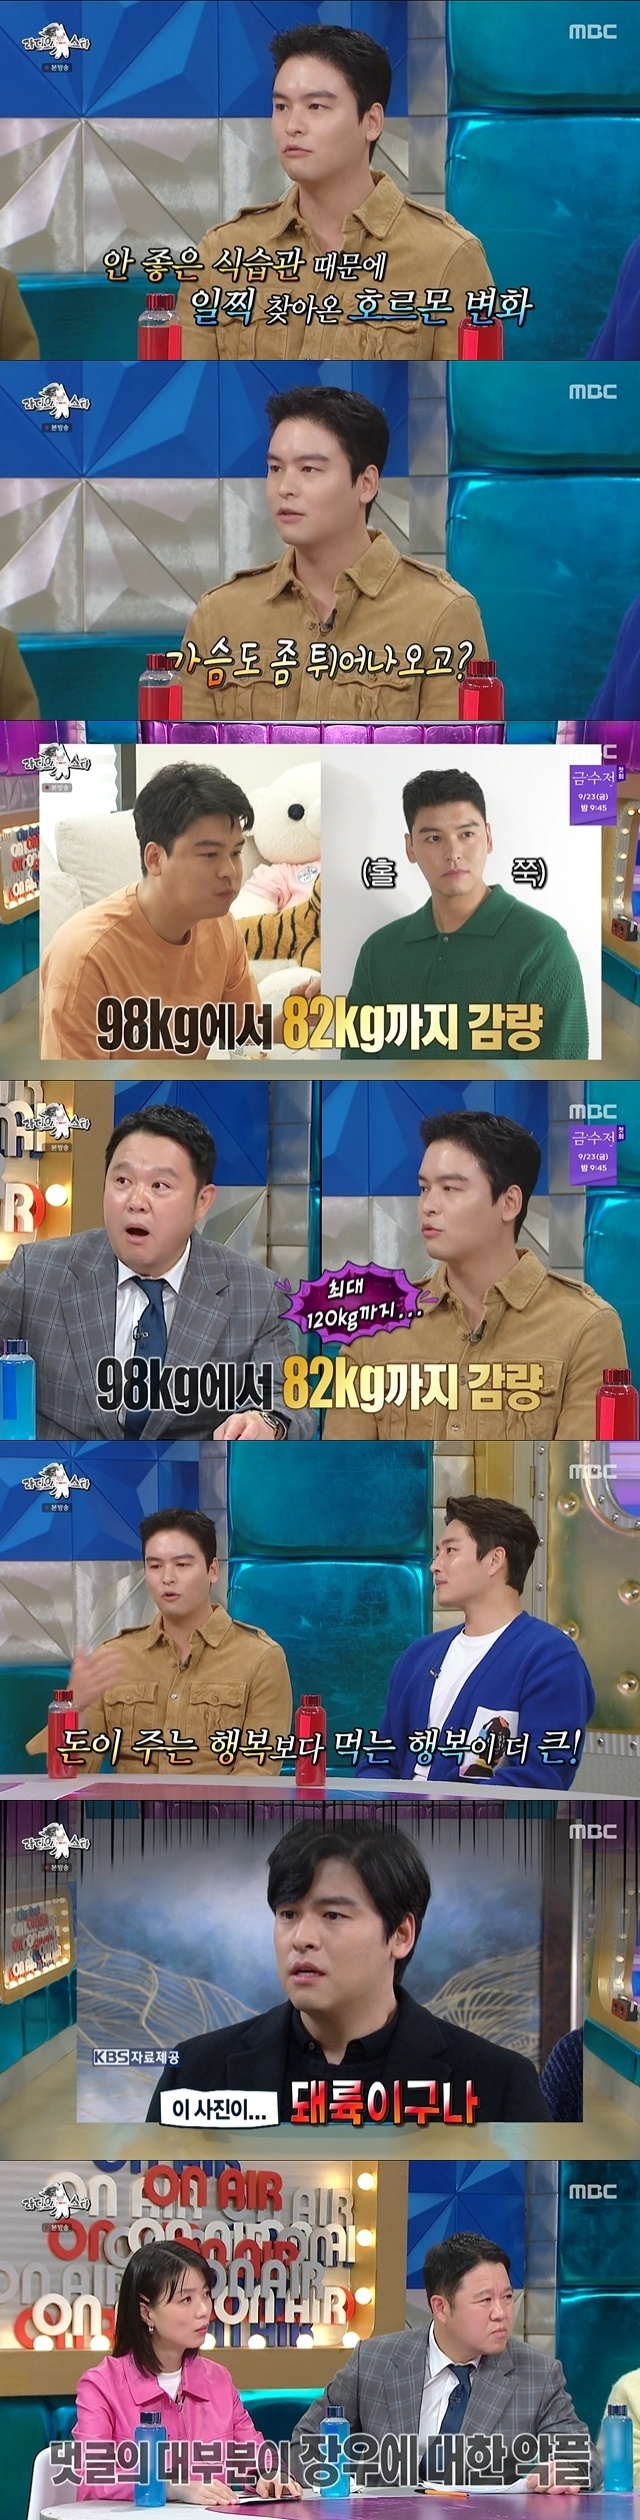 Actor Lee Jang-woo has released several episodes including diet, eating habits, and anecdotes on the set.In the 786th episode of MBCs entertainment Radio Star (hereinafter referred to as Radio Star), which aired on September 21, Lee Jang-woo appeared as a guest along with Simon Dominic (Simon Dominic), Min Woo Hyuk and Coogie.Lee Jang-woo said, In the mid-30s and late, I wanted to see why I was so tearful and my body became strange.I was a person who had to know logically, and there was a problem with Hormone. Gim Gu-ra, who is as interested in Hormone as Lee Jang-woo, pretended to know that he was originally in his mid-40s and came early, and Lee Jang-woo said, I came first because of eating habits and drinking problems.He drew attention when Gim Gu-ra asked, Chest is also popping out a little bit, admitting frankly, Yes.Lee Jang-woo said, I decided to change my eating habits and I was able to eat well. He said that he used the delivery application, which is the most frequently used food ingredients among mobile phone applications.Lee Jang-woos nickname was Prince of the Flour because he used a lot of MSG powder when cooking.Lee Jang-woo said, I have to eat food quickly, so when I hit it and put MSG in it, it started to taste like it was good to cook. People were so worried about me. MSG is not so bad.Nowadays, it is said that it makes it healthy through fermentation process. Lee Jang-woo had about 50 kinds of MSG powder including cow, pork, crab and shellfish.Lee Jang-woo said, I was originally a gourmet, and nowadays I am eating a lot with Jeon Hyun-moo and Park Na-rae.Asked if the food is about Hyun Joo-yeop, he said, If you are not that good, you eat four or five if you are alone. People who know me say that I do not have much weight.Min Woo Hyuk said Lee Jang-woo is a single evangelist among actors, who said: I was under diet stress and saw a Nobel Prize paper.They say good cells eat bad cells and fast for three or seven days makes me feel better. I tried until the seventh.I eat only water, but on the first day, I feel like I am going to die because of my desire to eat, and my head is sick. After three days, I became lighter.I asked my doctor, and he said that if you do it once a year, the detox effect is good.Lee Jang-woo recently said he was on a diet in a new way, which was also a fasting event, which he said was intermittent fasting, and it was not easy to tolerate.I turn on the stopwatch and I eat a lot in 10 hours. When the fasting place was mentioned, he said, So I wanted to be a Vic-Fezensac. I honestly searched. (When I did the search), there are pictures.I could not stand the fact that I was in the picture. He laughed at the reason for giving up as much as the fasting.Lee Jang-woo instead said, I did it at home and it was possible. When asked about my current weight, I said, I do not shoot a lot, so I went to 98kg and now 82kg.I went up to 120kg at the maximum. I was fat in high school. Lee Jang-woo asked if he would quit his diet after retirement. Yesterday I said, Why am I dieting? I think I am the happiest person to eat. I am not a happy person because I have a lot of money. I always think that I should buy a shop and live a simple life because I have good cooking skills.I am confident that I will make a lot of money with Food Vic-Fezensac. I am thinking about doing kimchi business. Lee Jang-woo could not miss the drama only one side that breathed Uee.He has a good affinity and he is doing well with his senior actors. He said, I fought a lot with Ue, while shooting One of my only ones.Lee Jang-woo said, I have to shoot a kiss god and I fight there, and I say, You shouldnt do that there, and then I kiss again when I get back.The make-up person loves to say scary, and Uee drips tears... and then she says no, so come here (this is it) .Still, Lee Jang-woo added: Im so close now.He also appeared in the character name Continental at the time, and he got a nickname that he could not laugh because of his flesh.Lee Jang-woo said: My name is Wang Dae-ryuk, and people called him Wang Hae-ryuk, and he ate so much that his throat got thicker. Almost 100,000 comments were my curse.It was the story that the male protagonist could not manage it. 